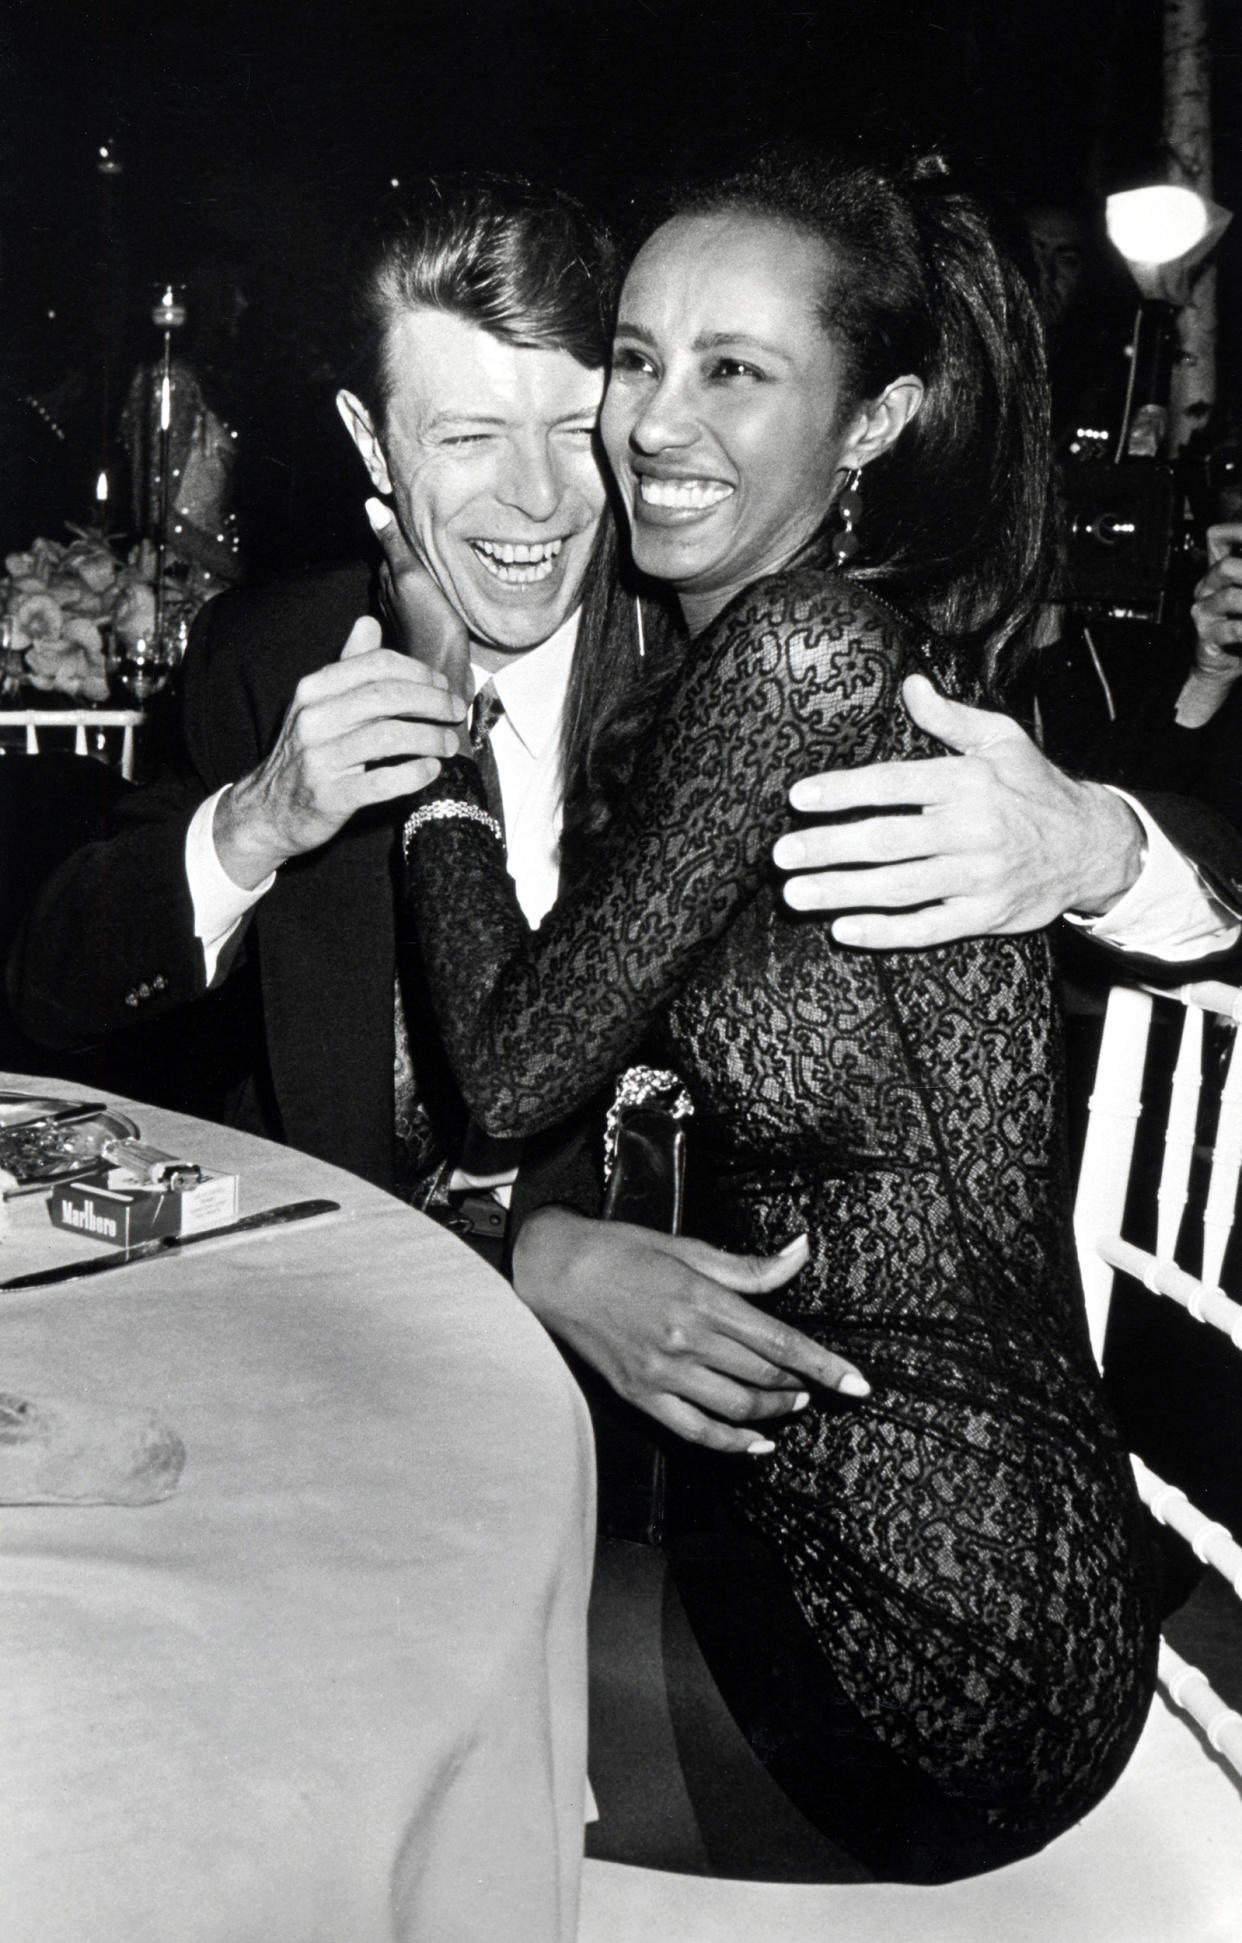 David Bowie and Iman (Ron Galella Collection via Getty Images)